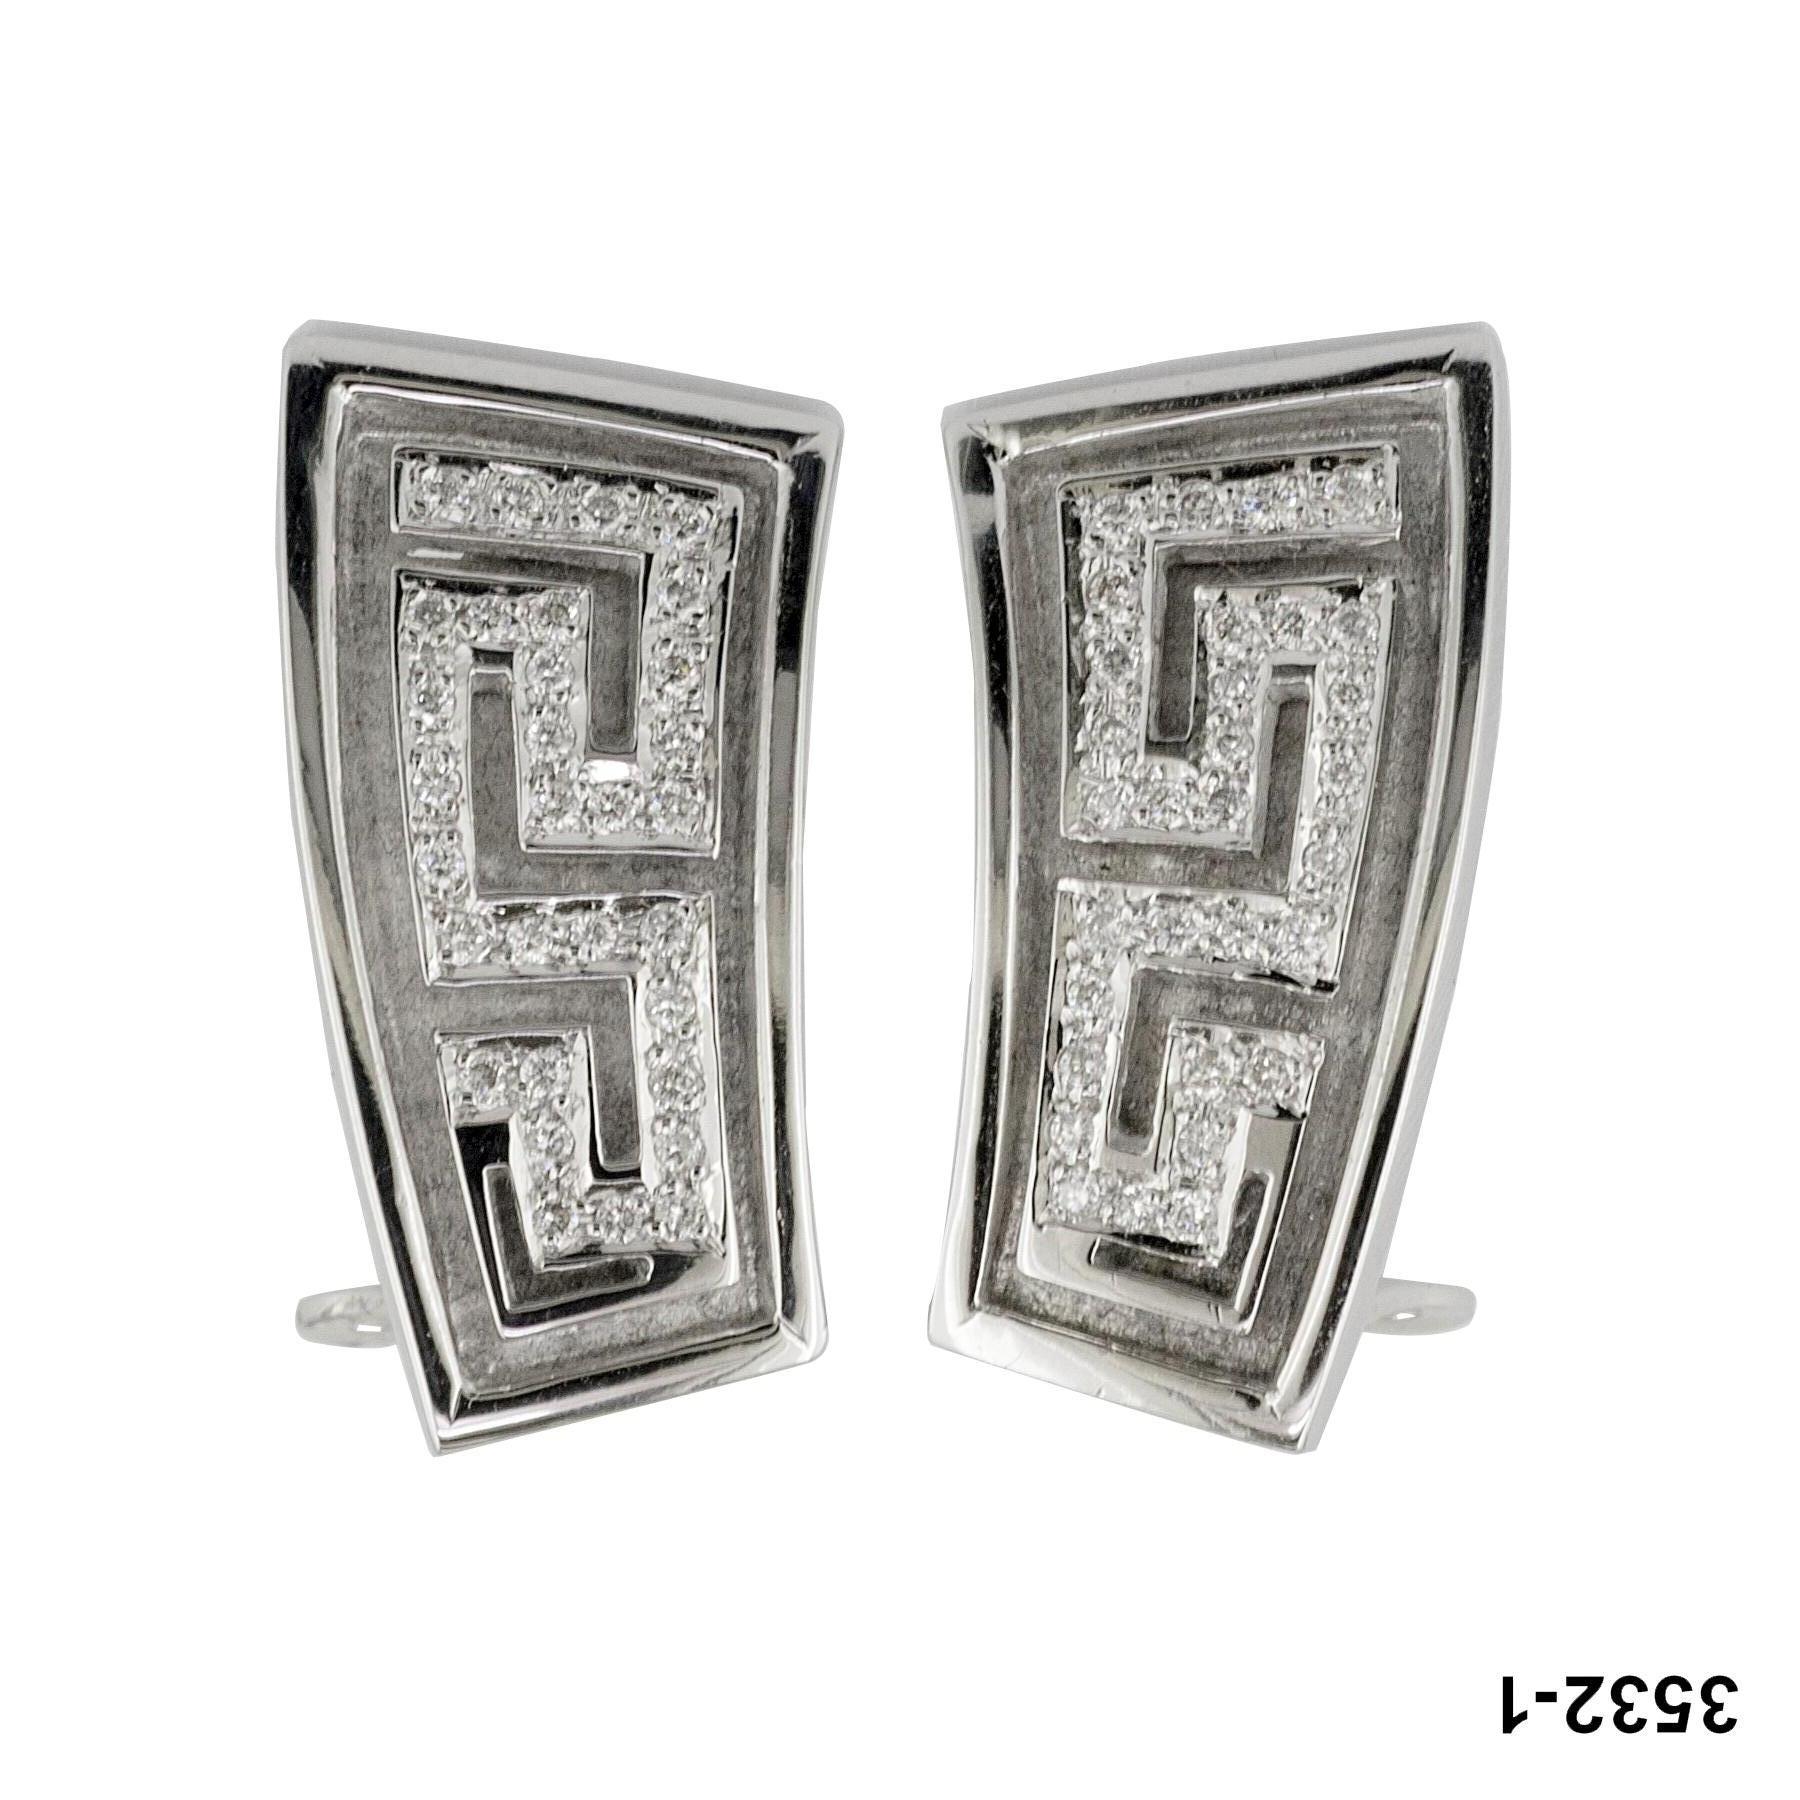 S. Georgios 18 Karat White Gold Hand Made Diamond Earrings with the Greek Key design all custom-made that symbolizes eternity. It is known as the symbol of long life and is one of the most classic designs in the world.
The stunning earrings are